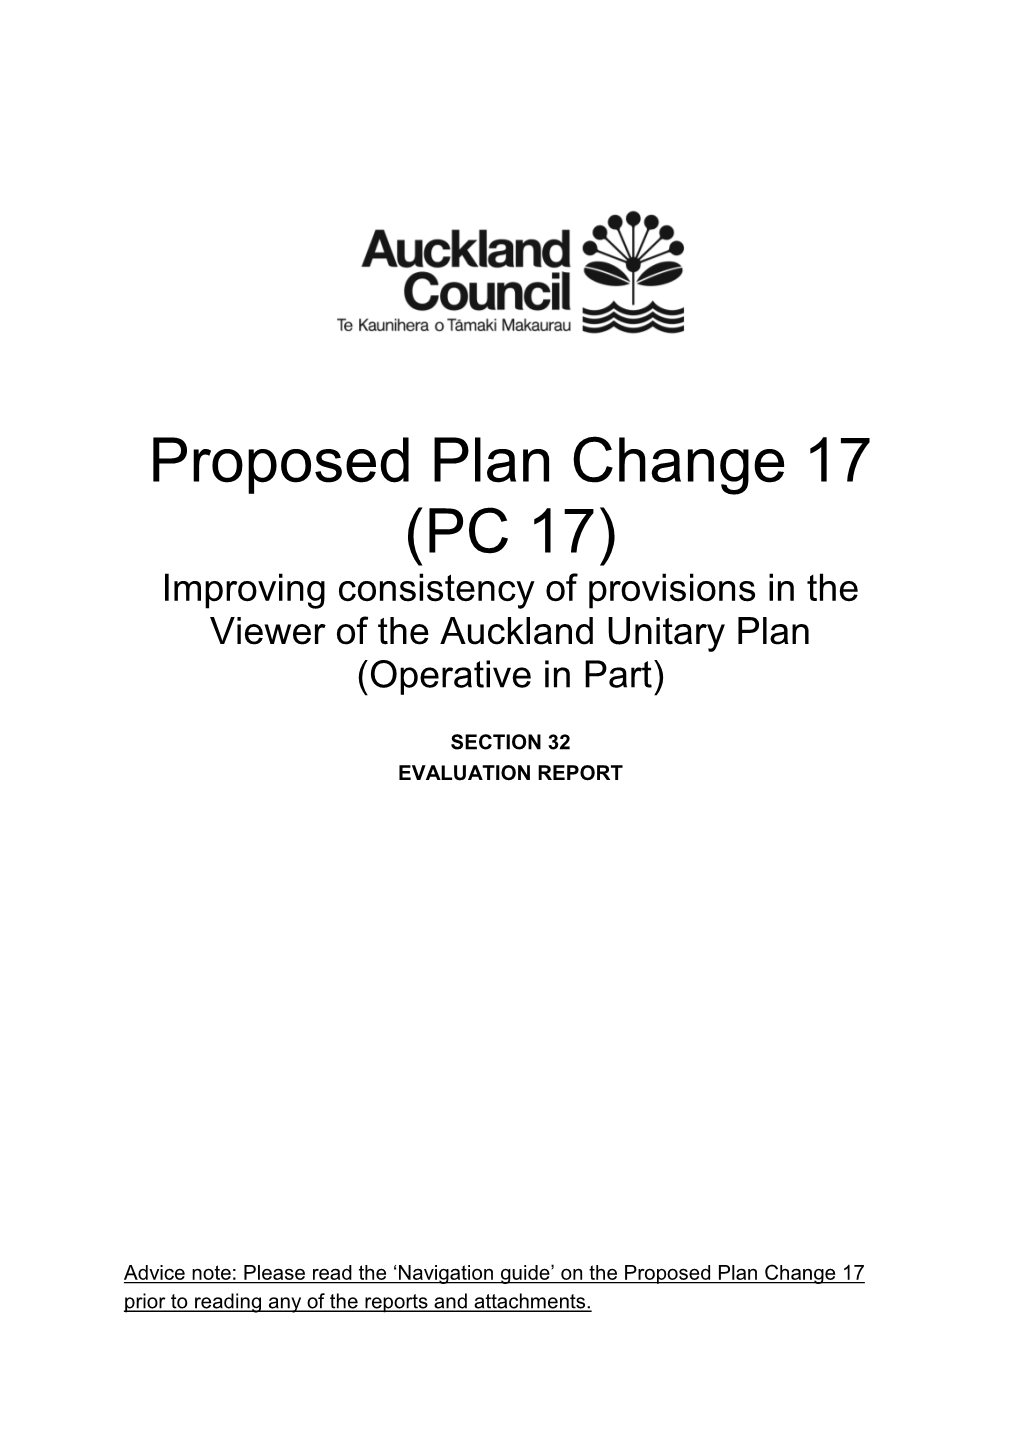 Proposed Plan Change 17 (PC 17) Improving Consistency of Provisions in the Viewer of the Auckland Unitary Plan (Operative in Part)